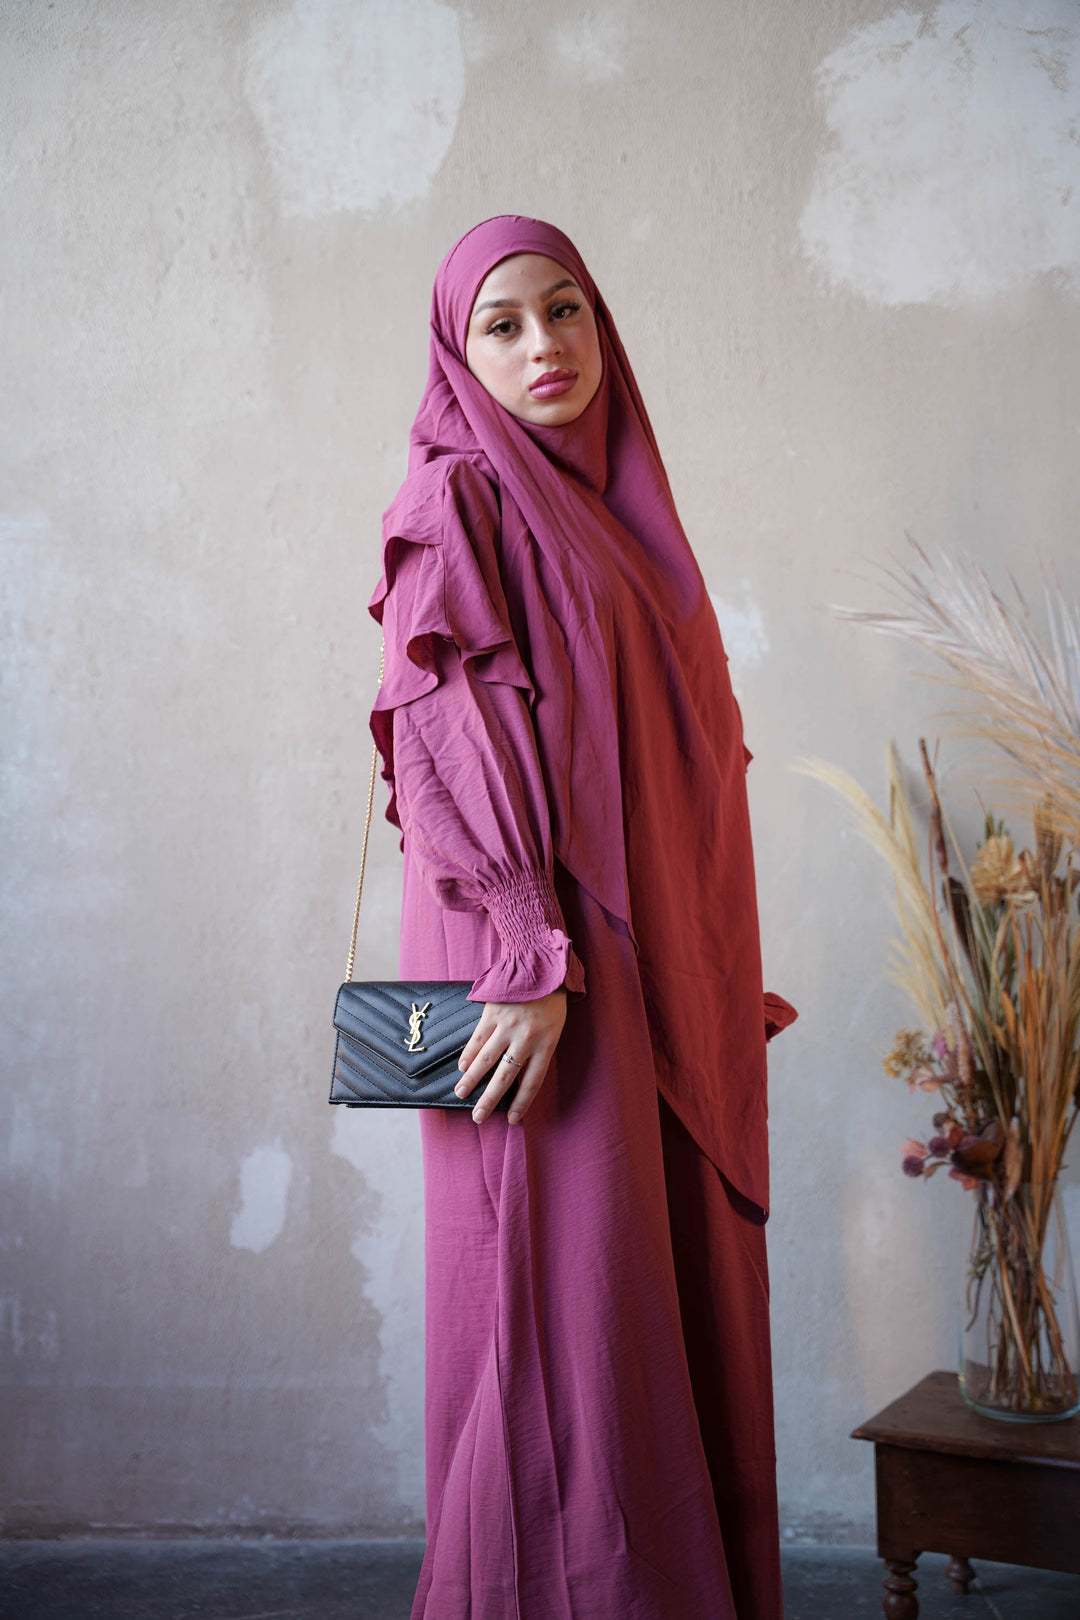 a woman in a hijab is holding a purse